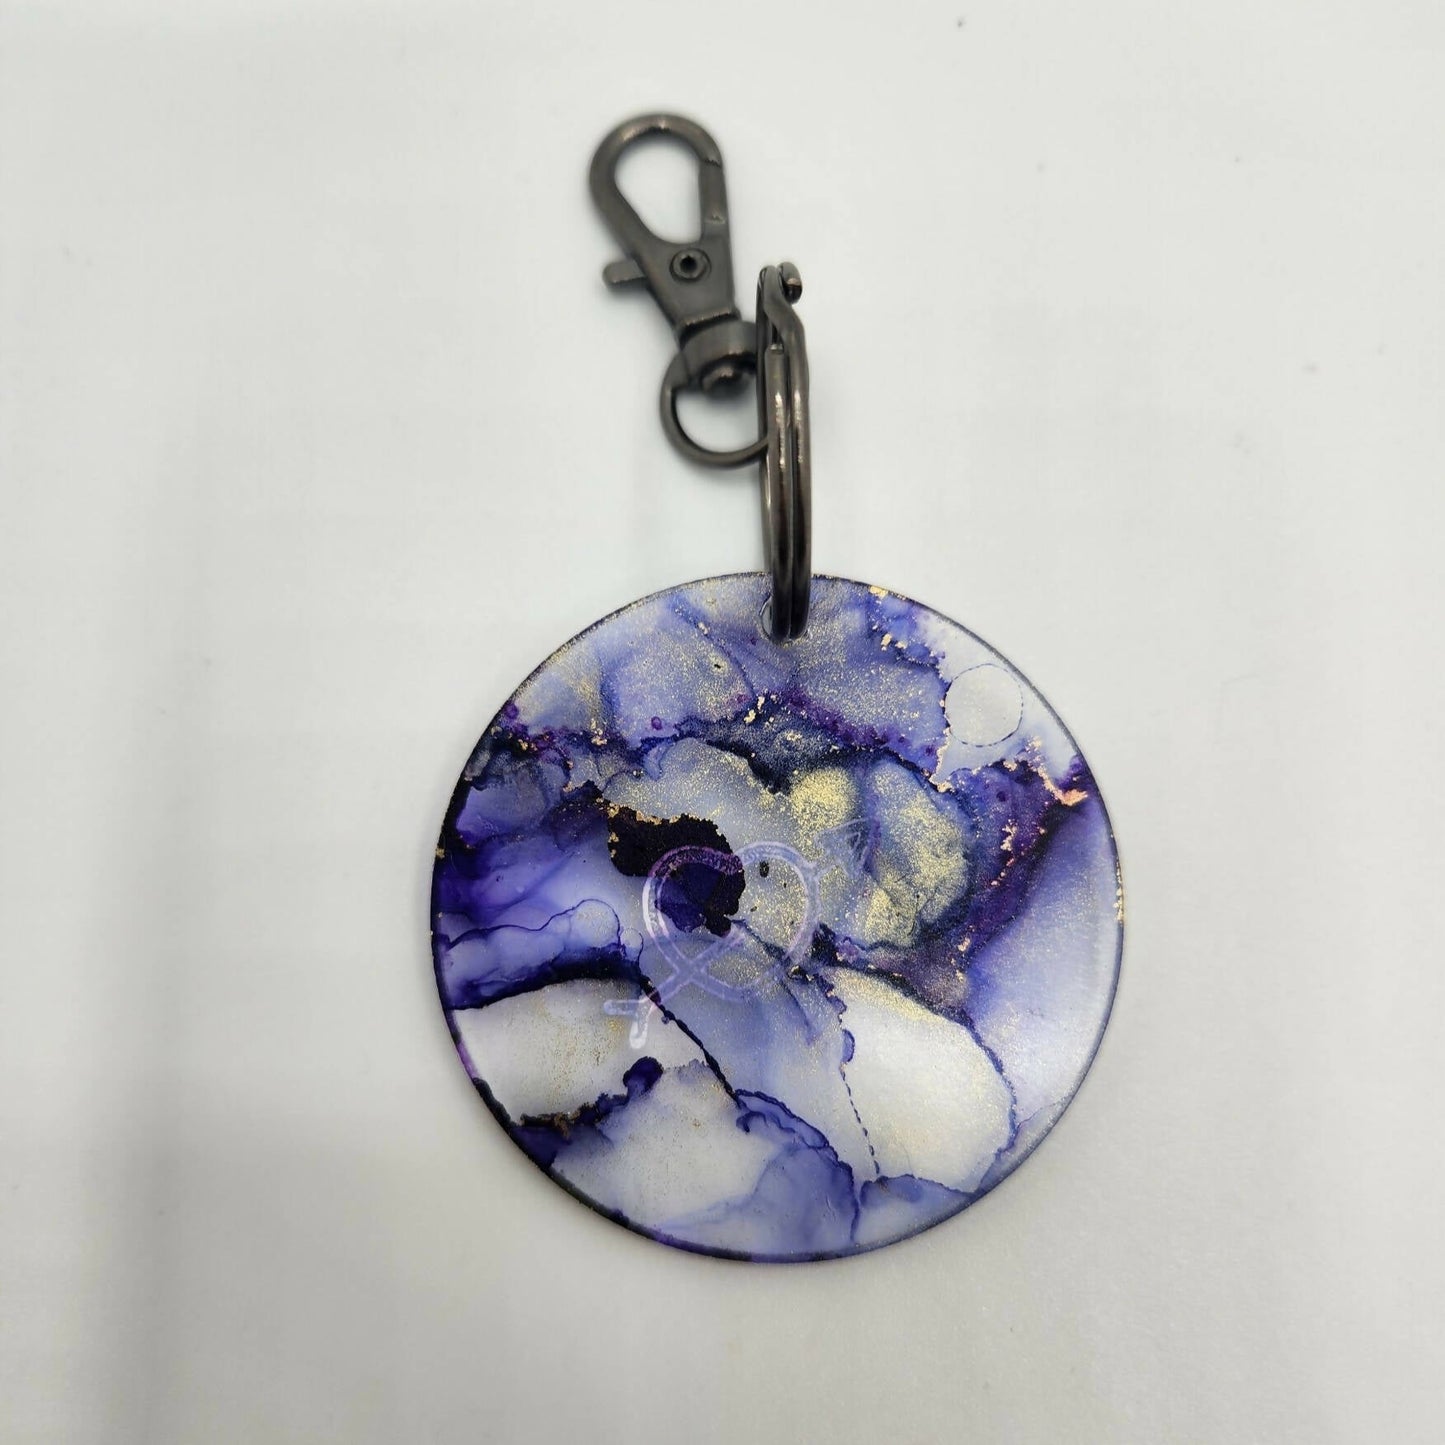 Key Chains - Alcohol Ink